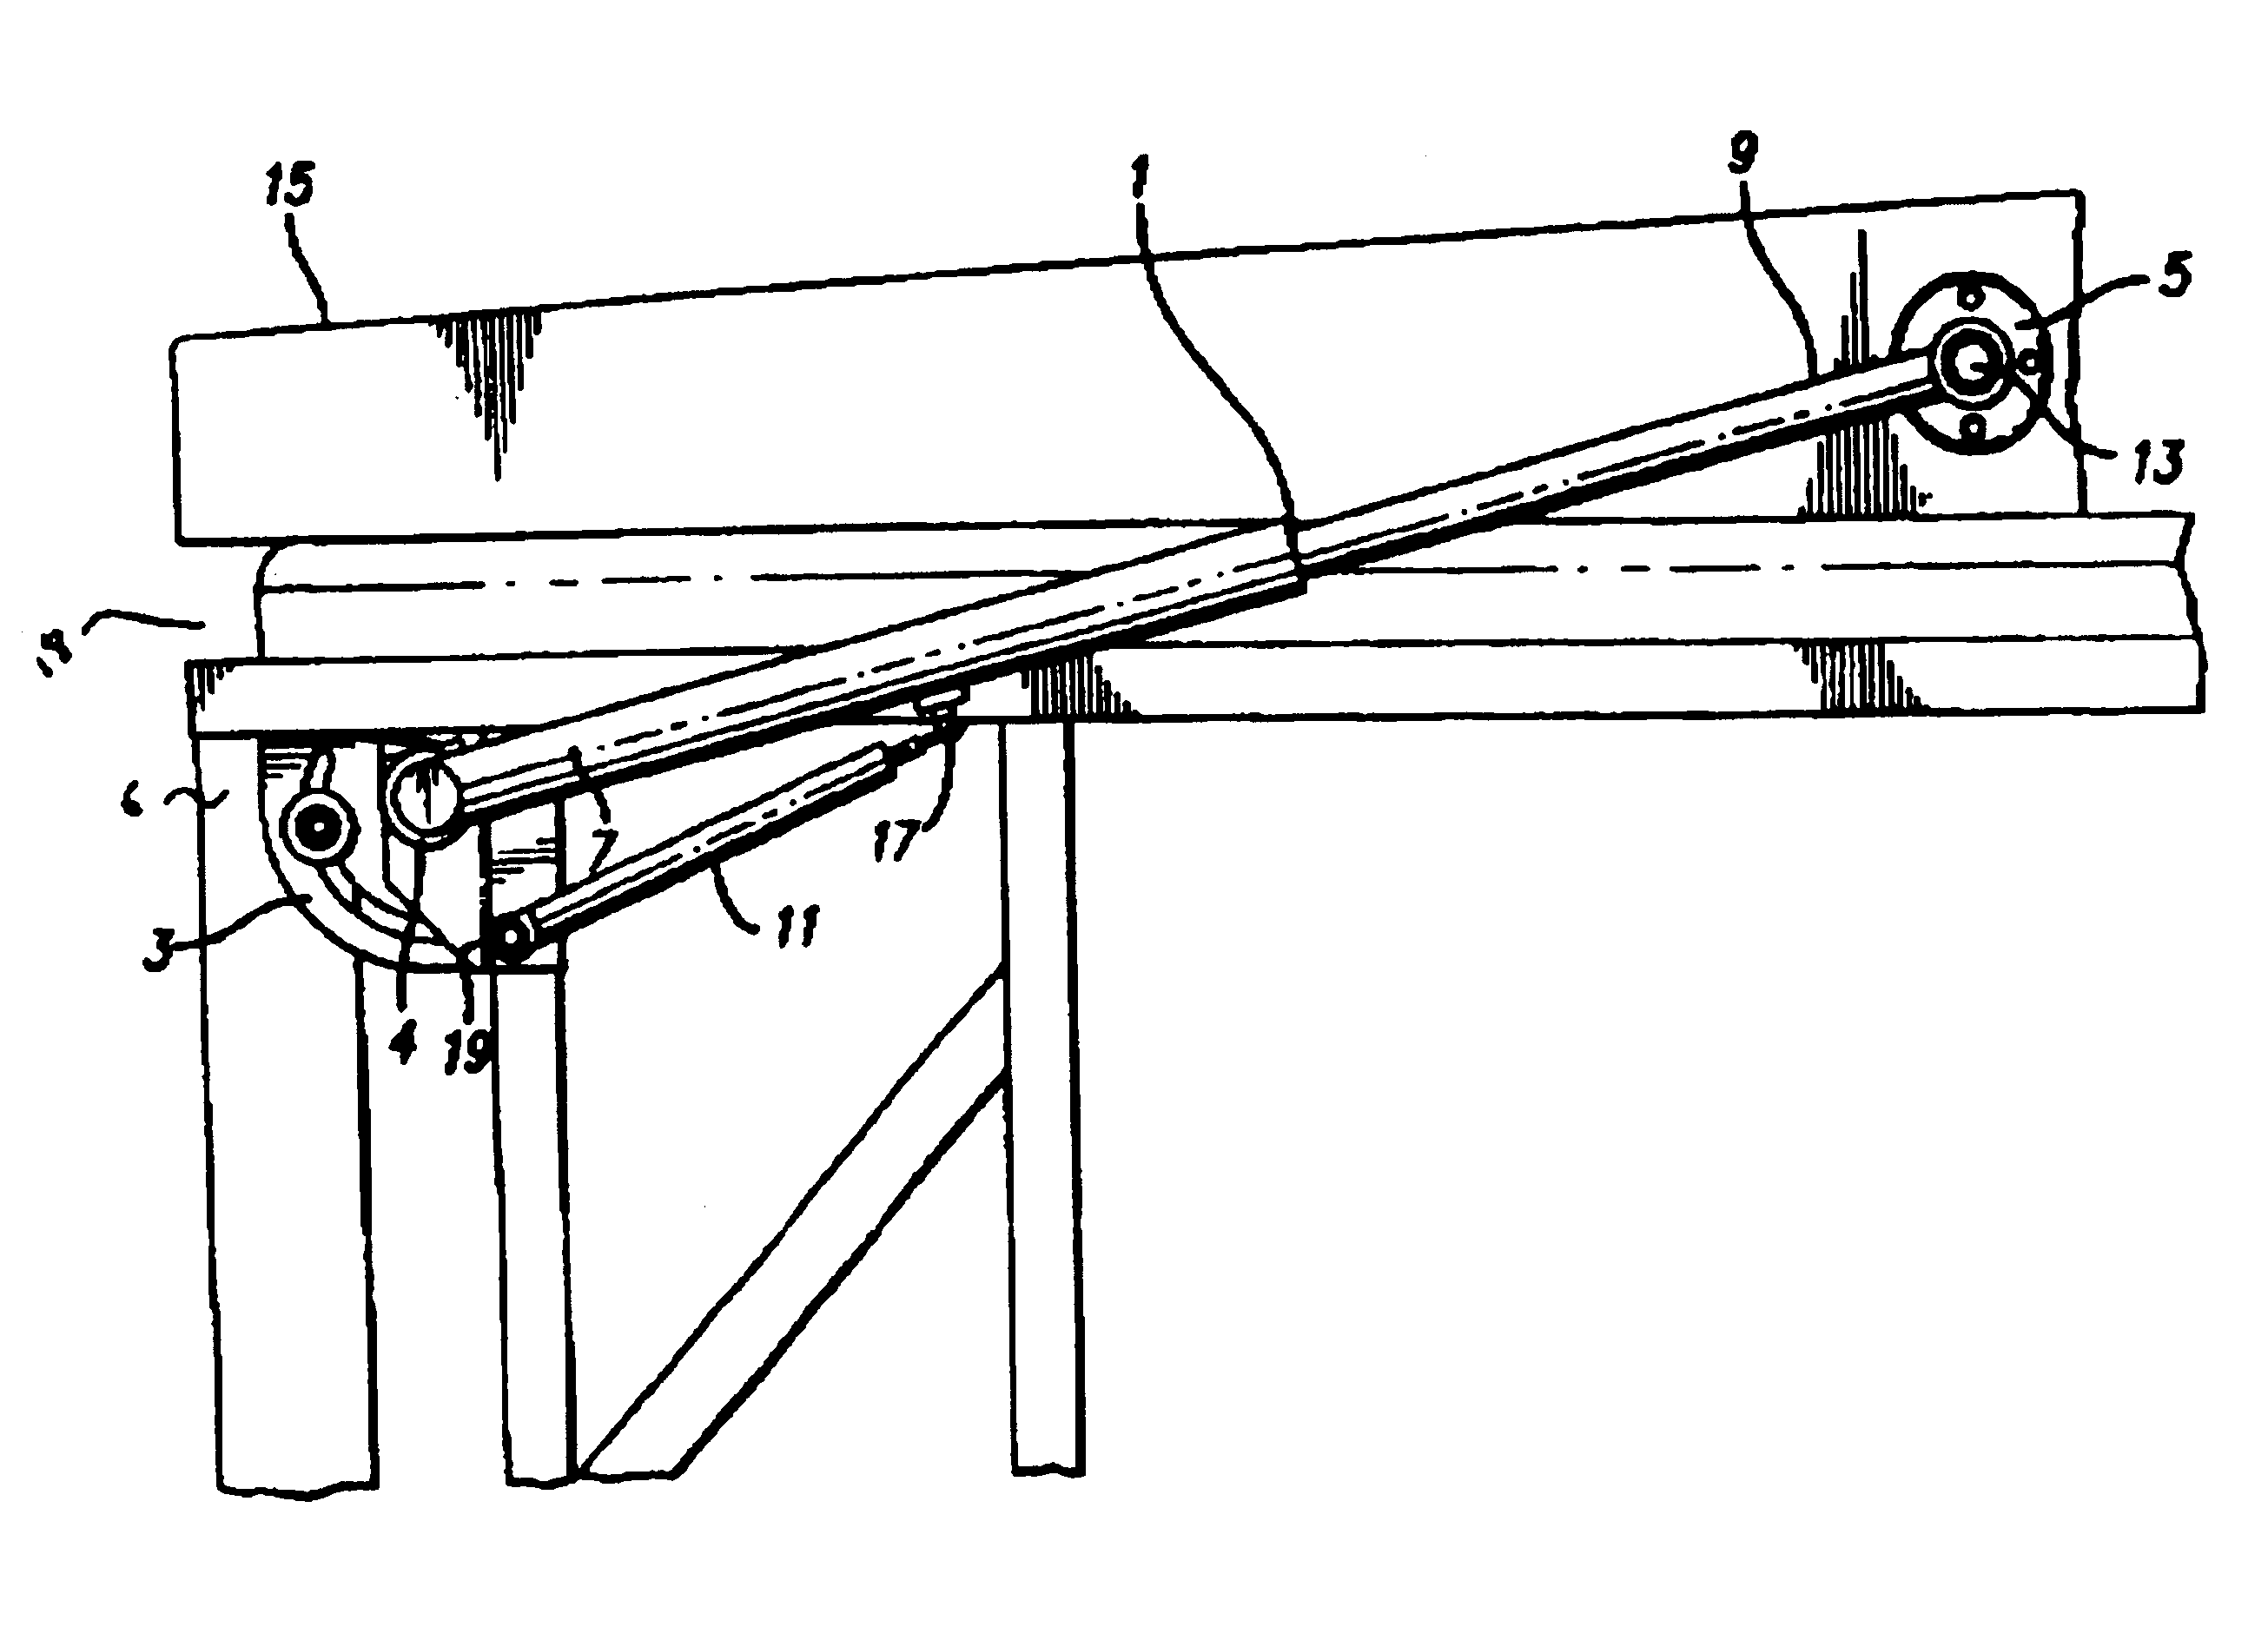 Spa cover lifting device